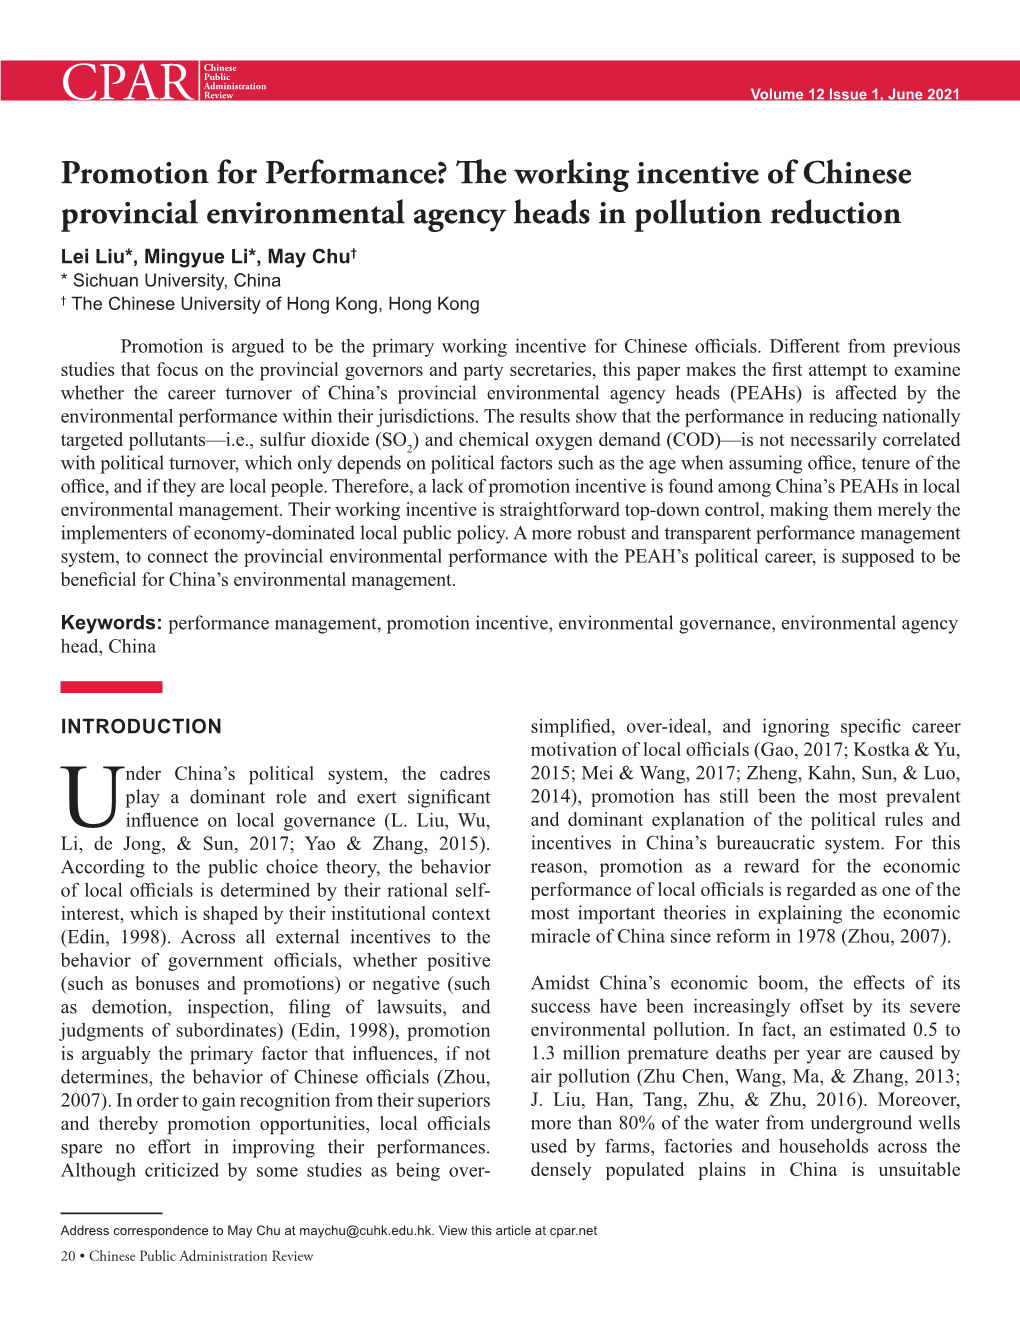 The Working Incentive of Chinese Provincial Environmental Agency